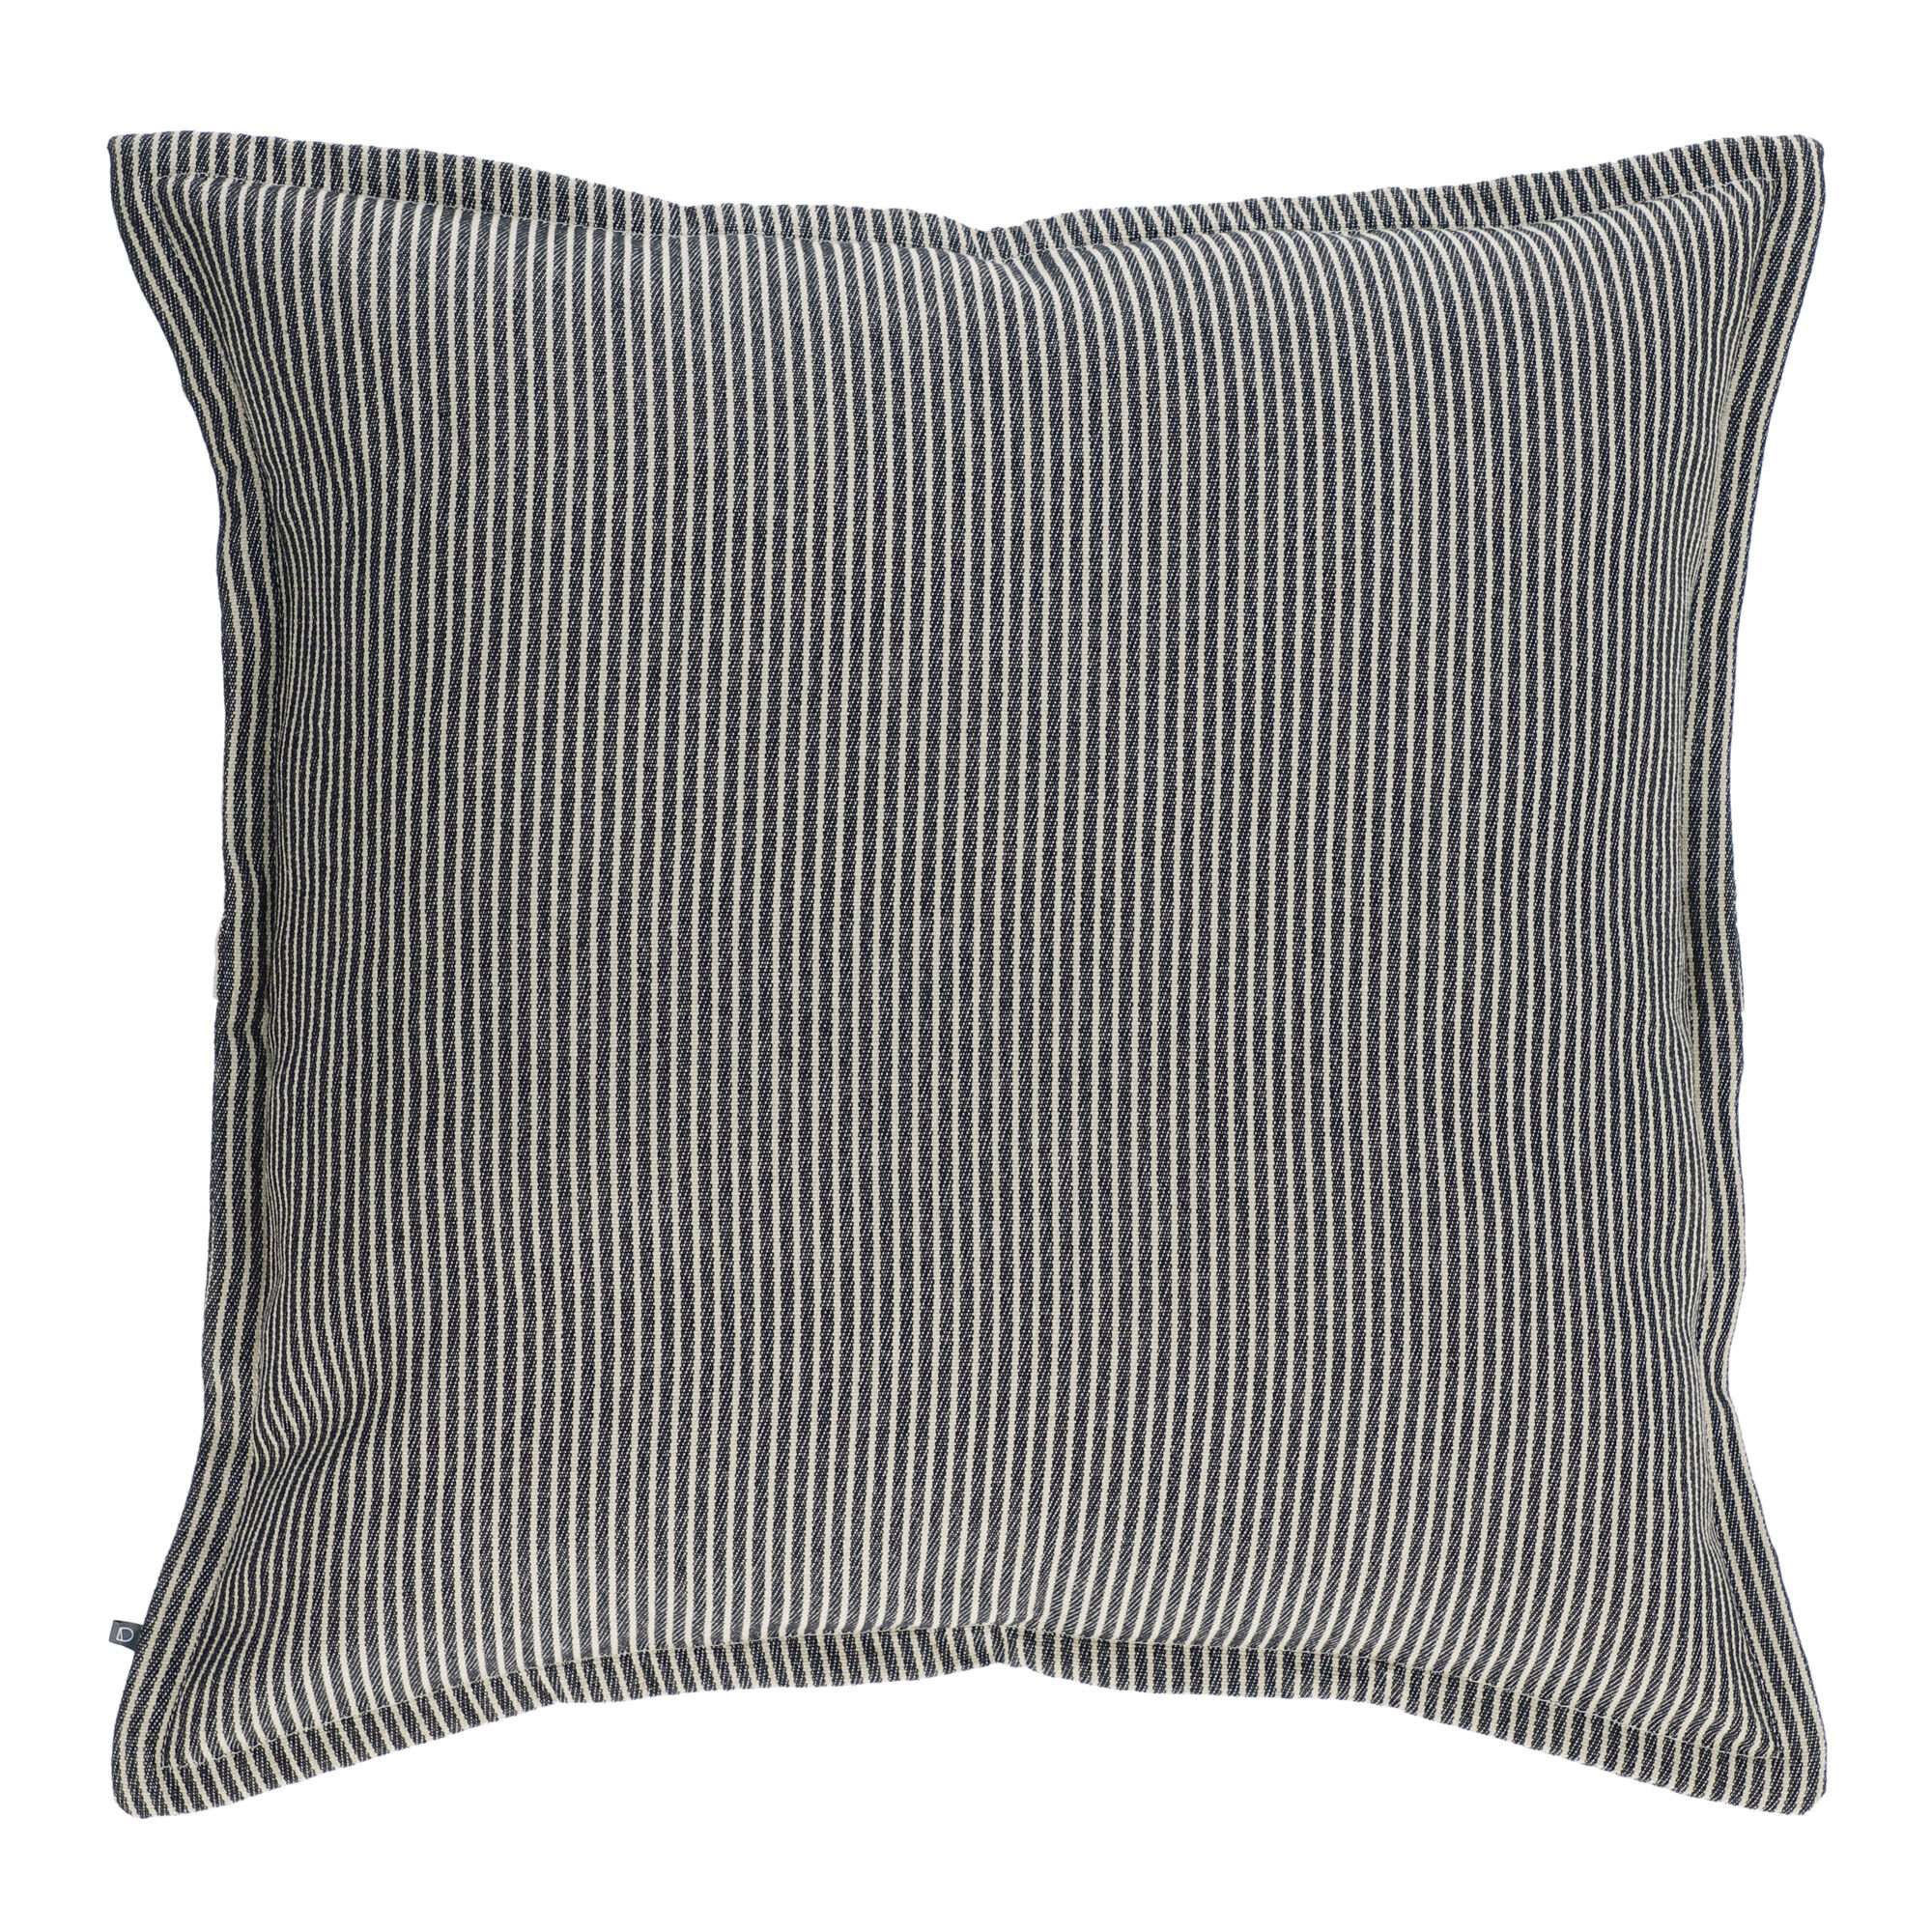 Kave Home Aleria cotton cushion cover with white and grey stripes 60 x 60 cm